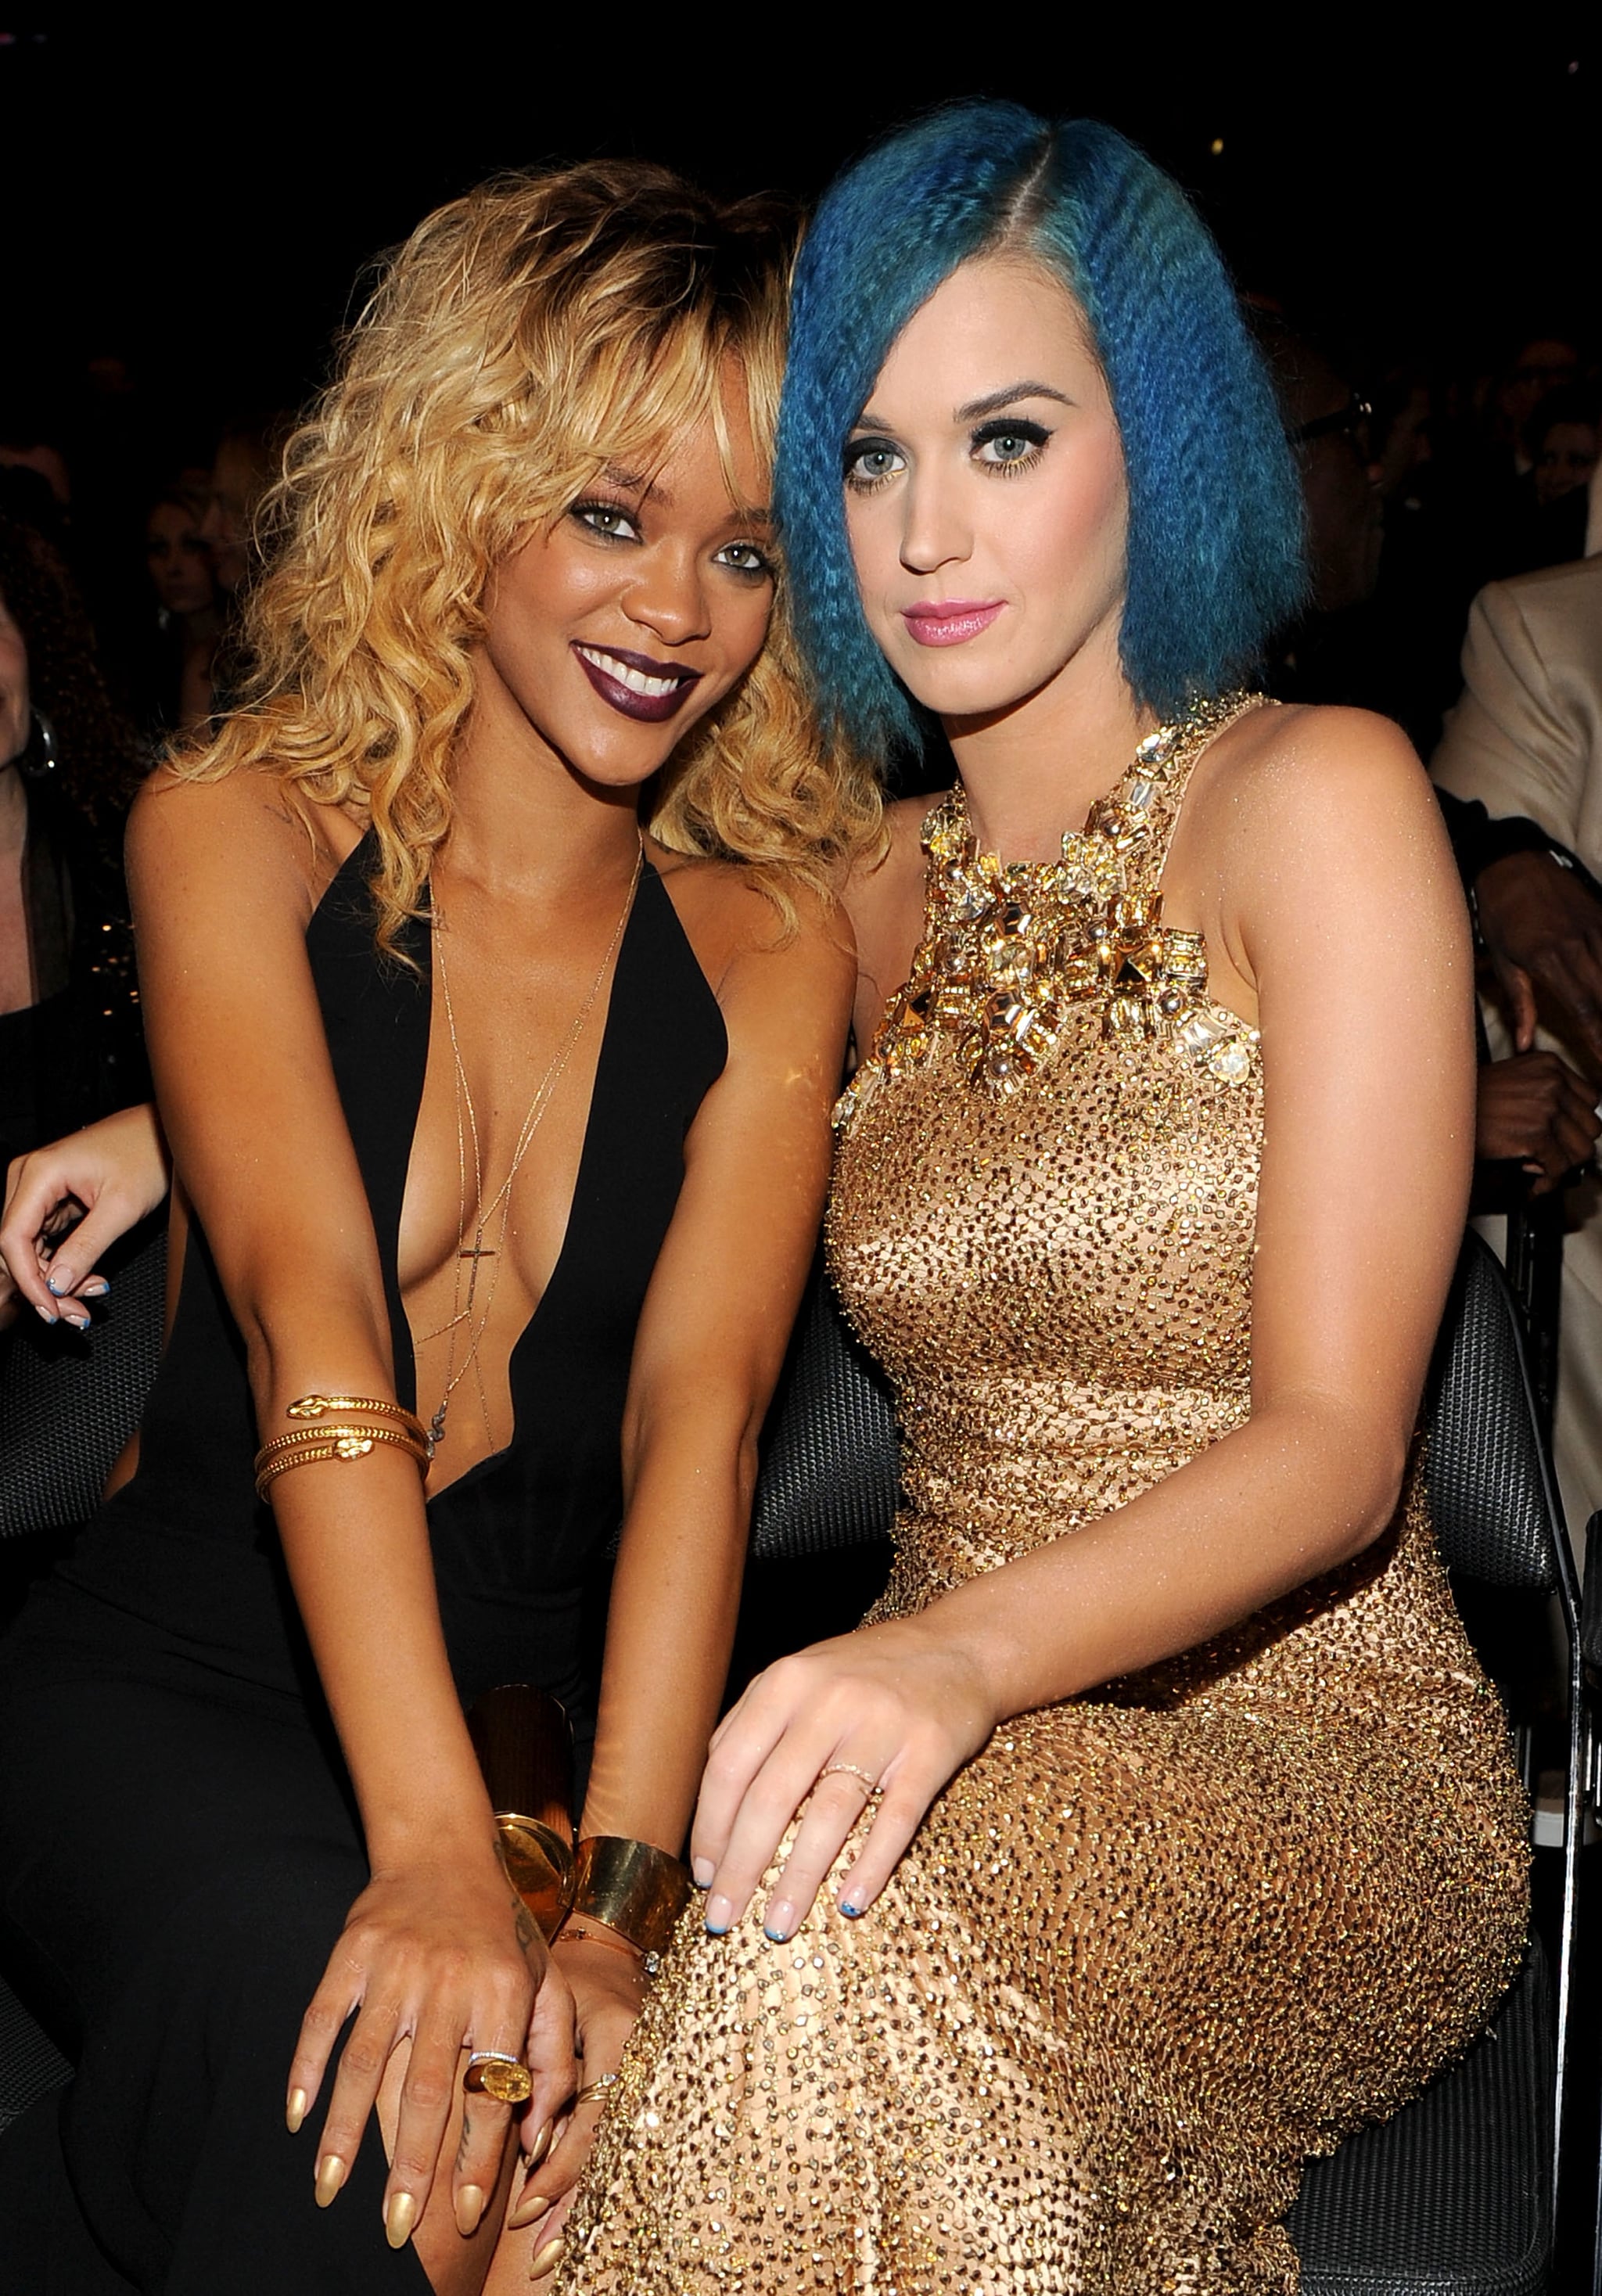 Best friends Rihanna and Katy Perry stayed close during the 2012 ceremony.